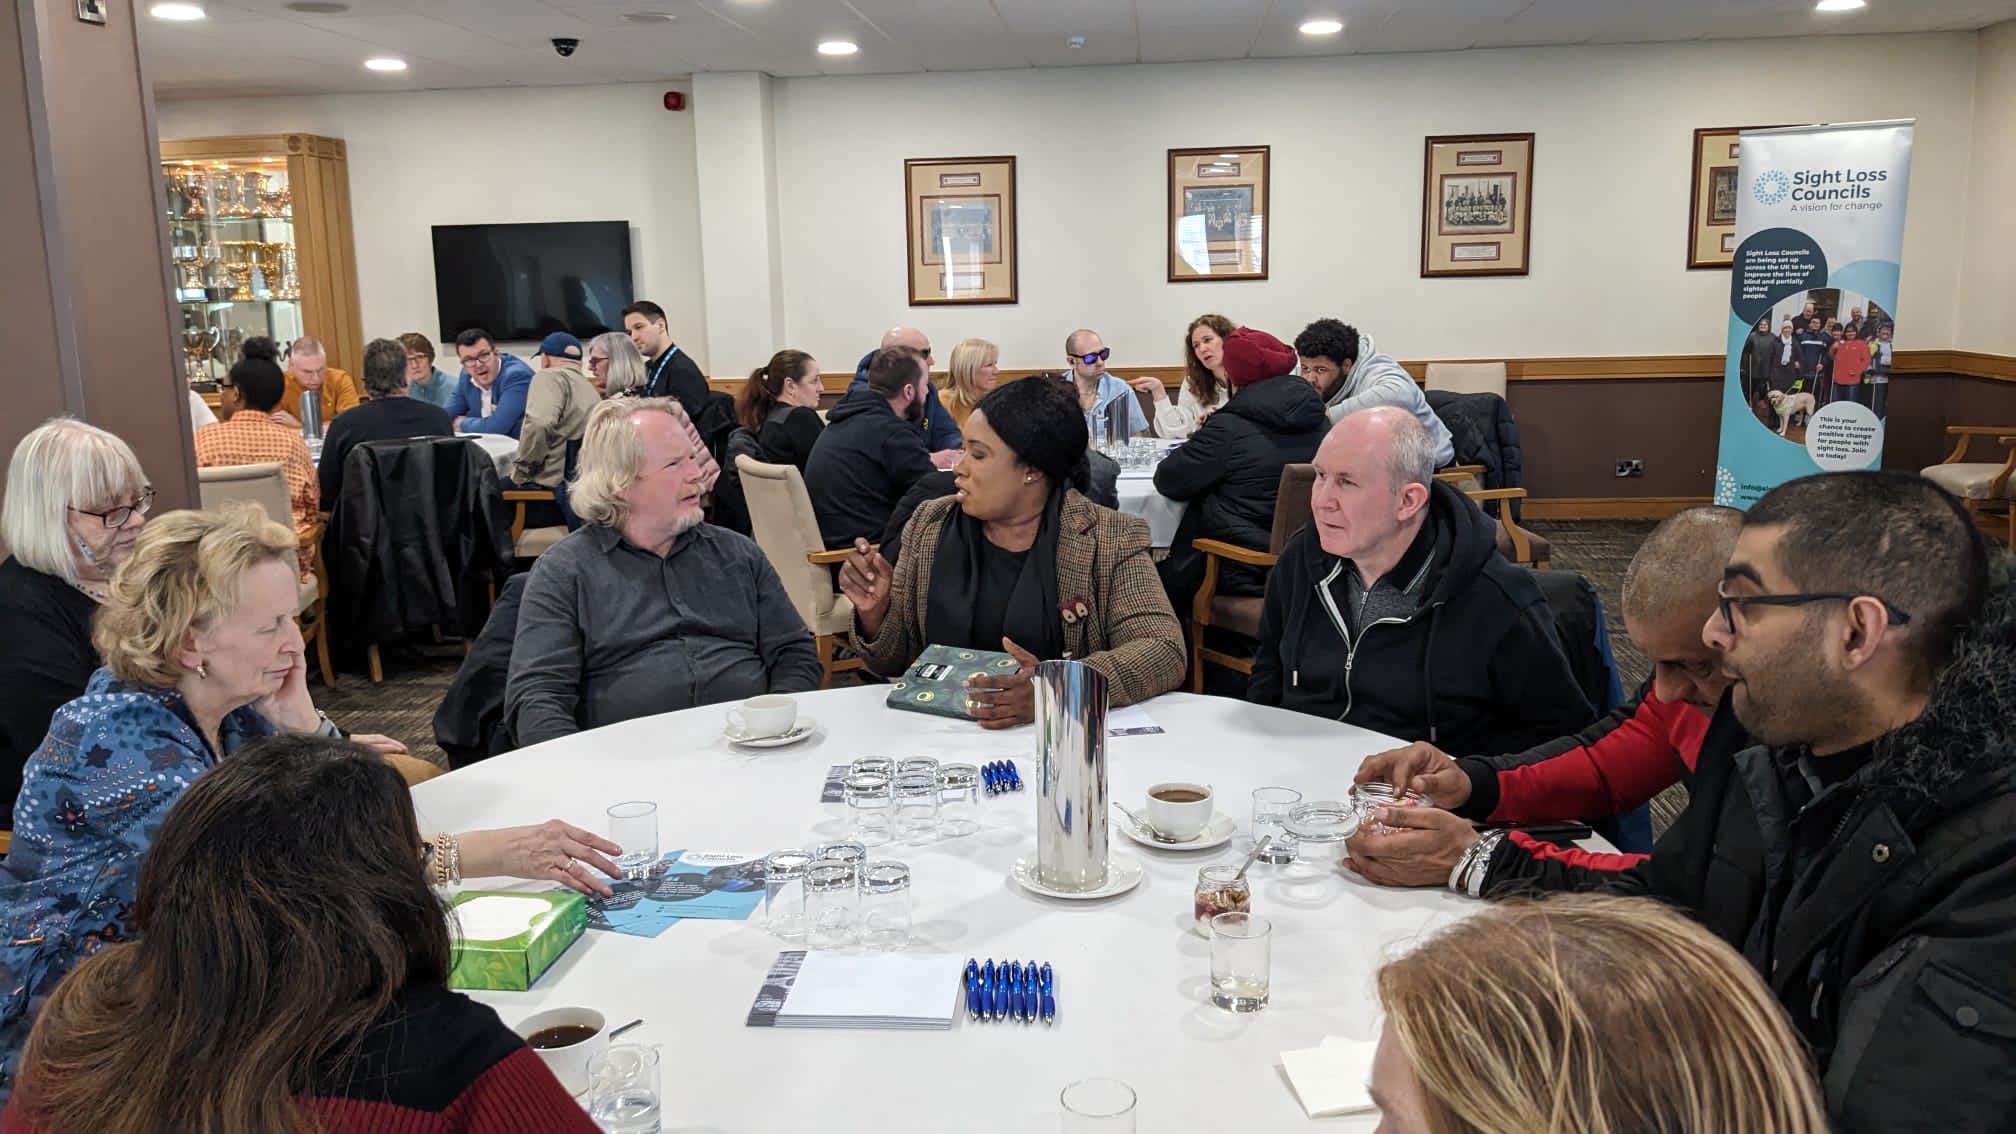 Table discussions with blind and partially sighted delegates, Sight Loss Council members and Beanca Mpofu (Vulnerabilities Team, University Hospitals Birmingham). Delegates are sat around circular tables in a large room. A Sight Loss Council banner is in the background.